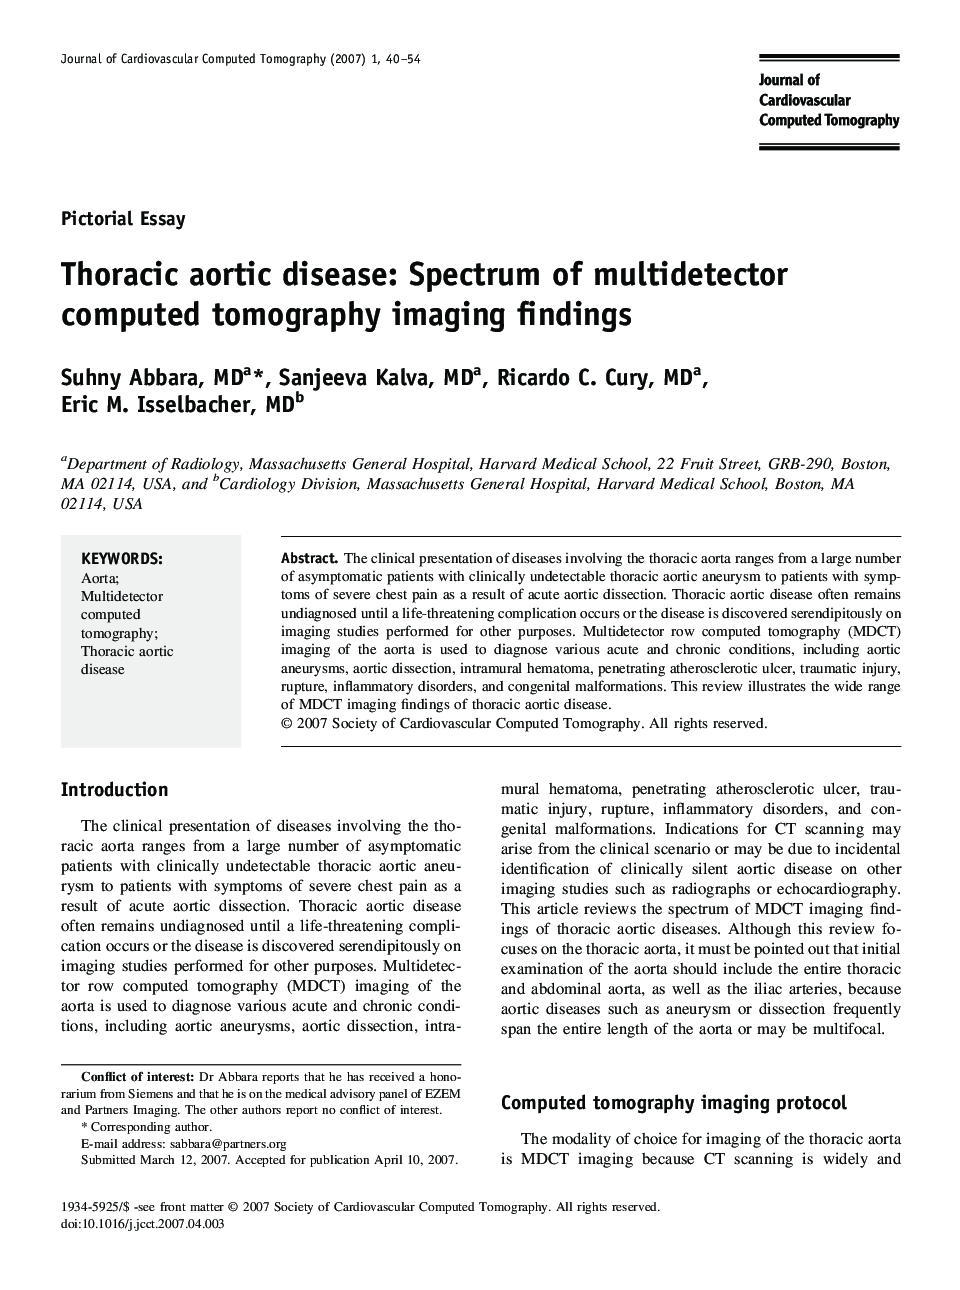 Thoracic aortic disease: Spectrum of multidetector computed tomography imaging findings